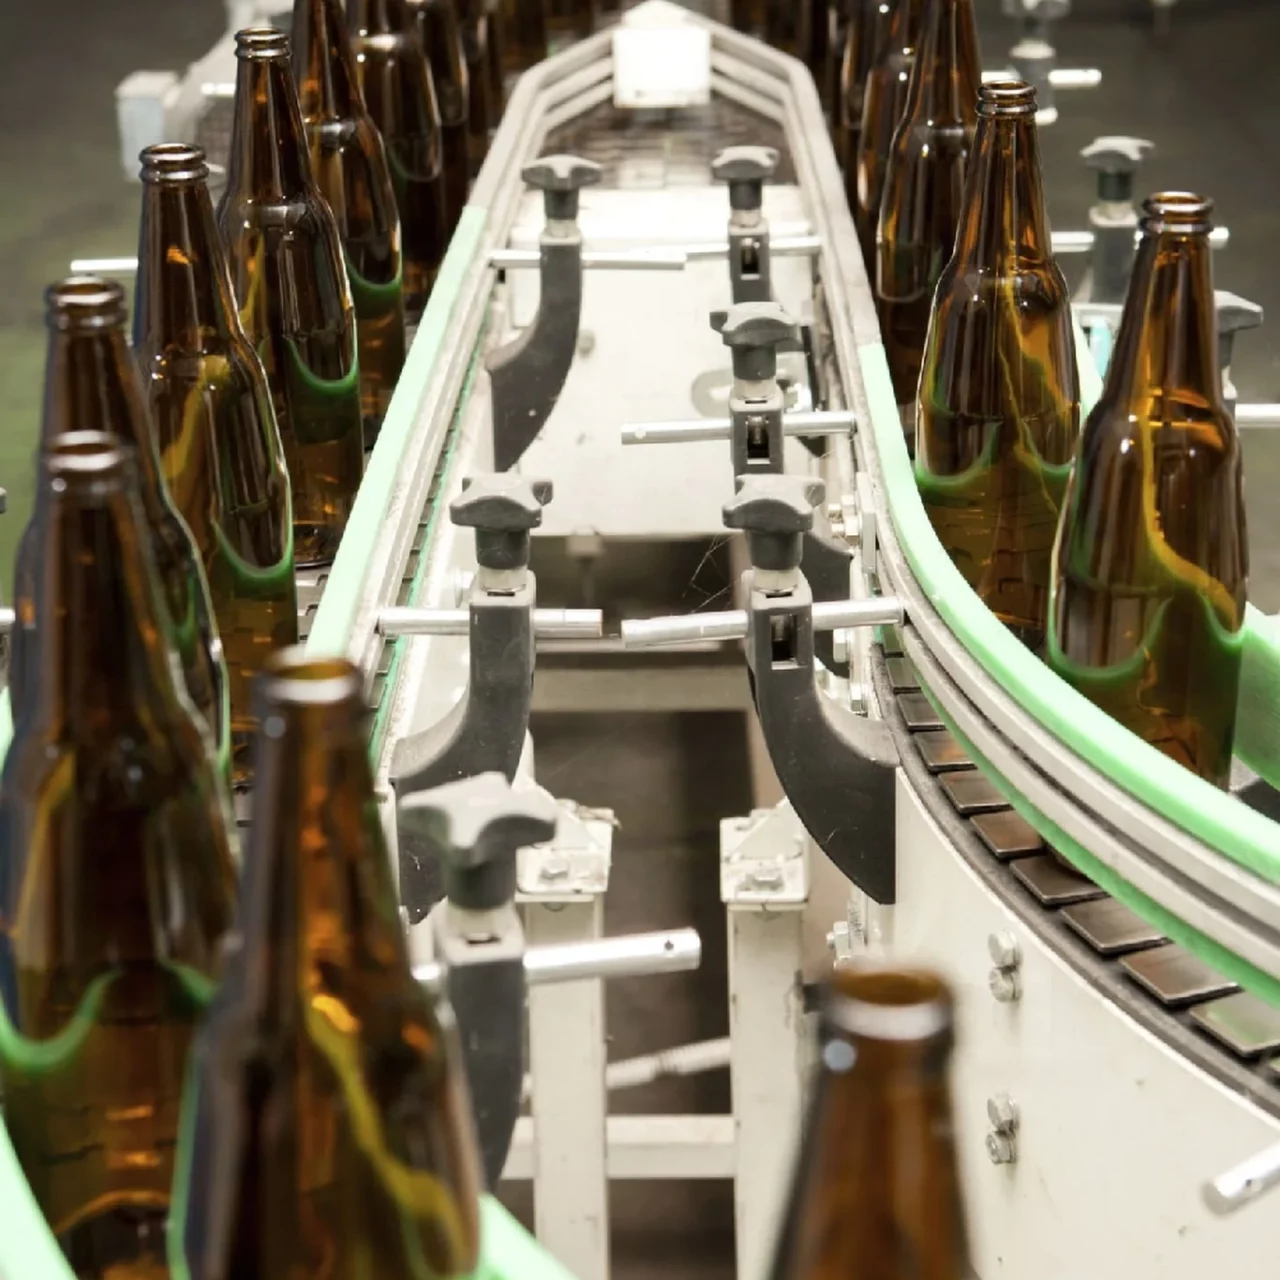 glass bottles being moved along the conveyor belt in the factory